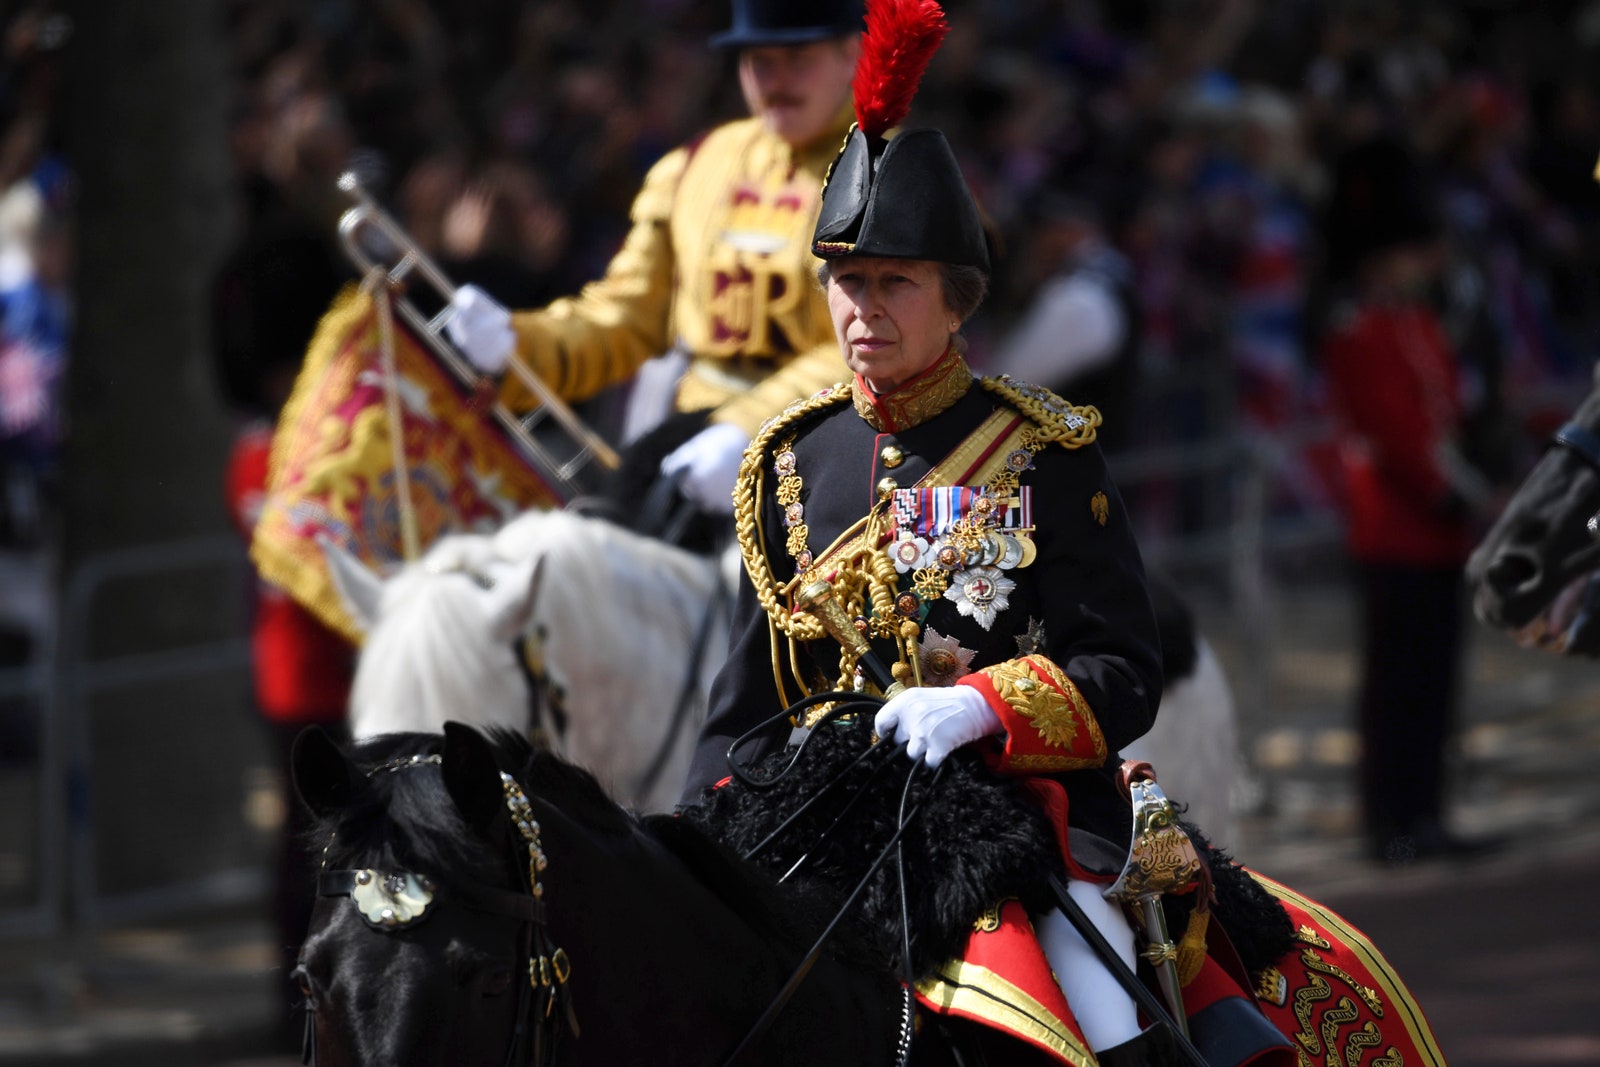 Princess Anne rides horseback during the Trooping the Colour in June 2022 during the Platinum Jubilee celebrations.